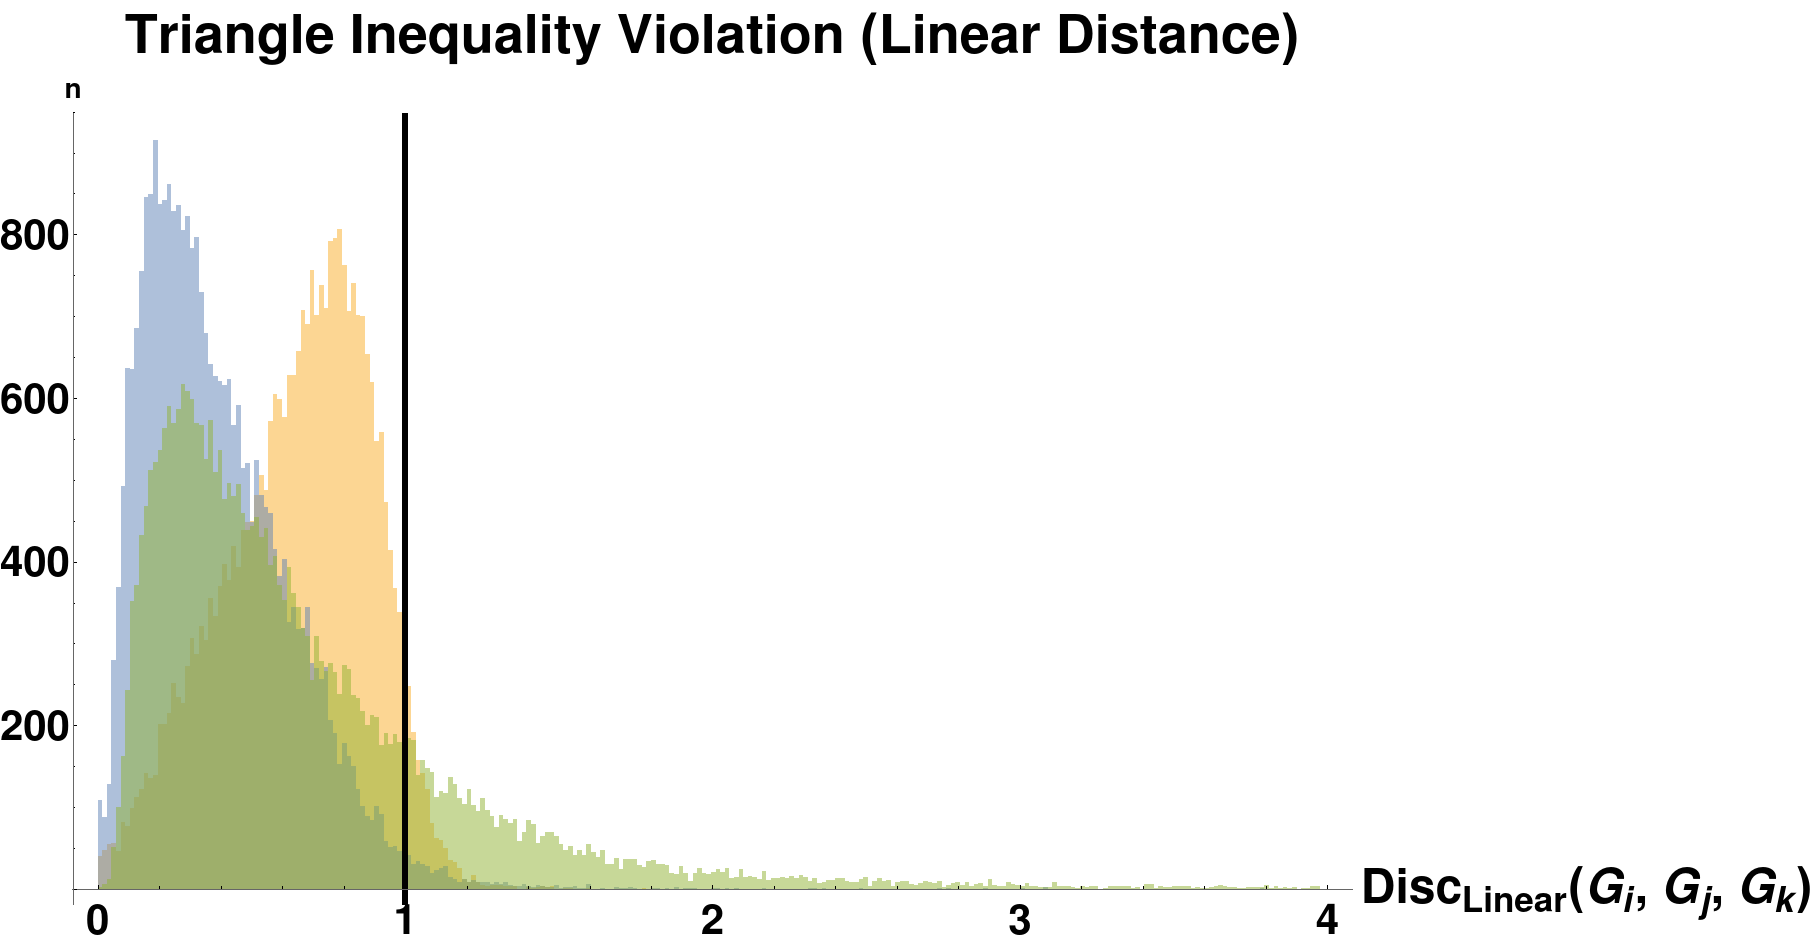 Histograms of triangle inequality violation. These plots show the distribution of \text{Disc}(G_1, G_2, G_3), as defined in the text, for the cases (a) top: the linear or small-time version of distance and (b) bottom: the exponential or arbitrary-time version of distance. We see that for the sizes of graph we consider, the largest violation of the triangle inequality is bounded, suggesting that our distance measure may be an infra-\rho-pseudometric for some value of \rho \approx 1.8 (linear version) or \rho \approx 5.0 (exponential version). See Table [tab:dist_versions] for a summary of the distance metric variants introduced in this paper. We also plot the same histogram for out-of-order (by vertex size) graph sequences: \text{Disc}(G_2, G_1, G_3) and \text{Disc}(G_3, G_2, G_1). Each plot has a line at x=1, the maximum discrepancy score for which the underlying distances satisfy the triangle inequality.